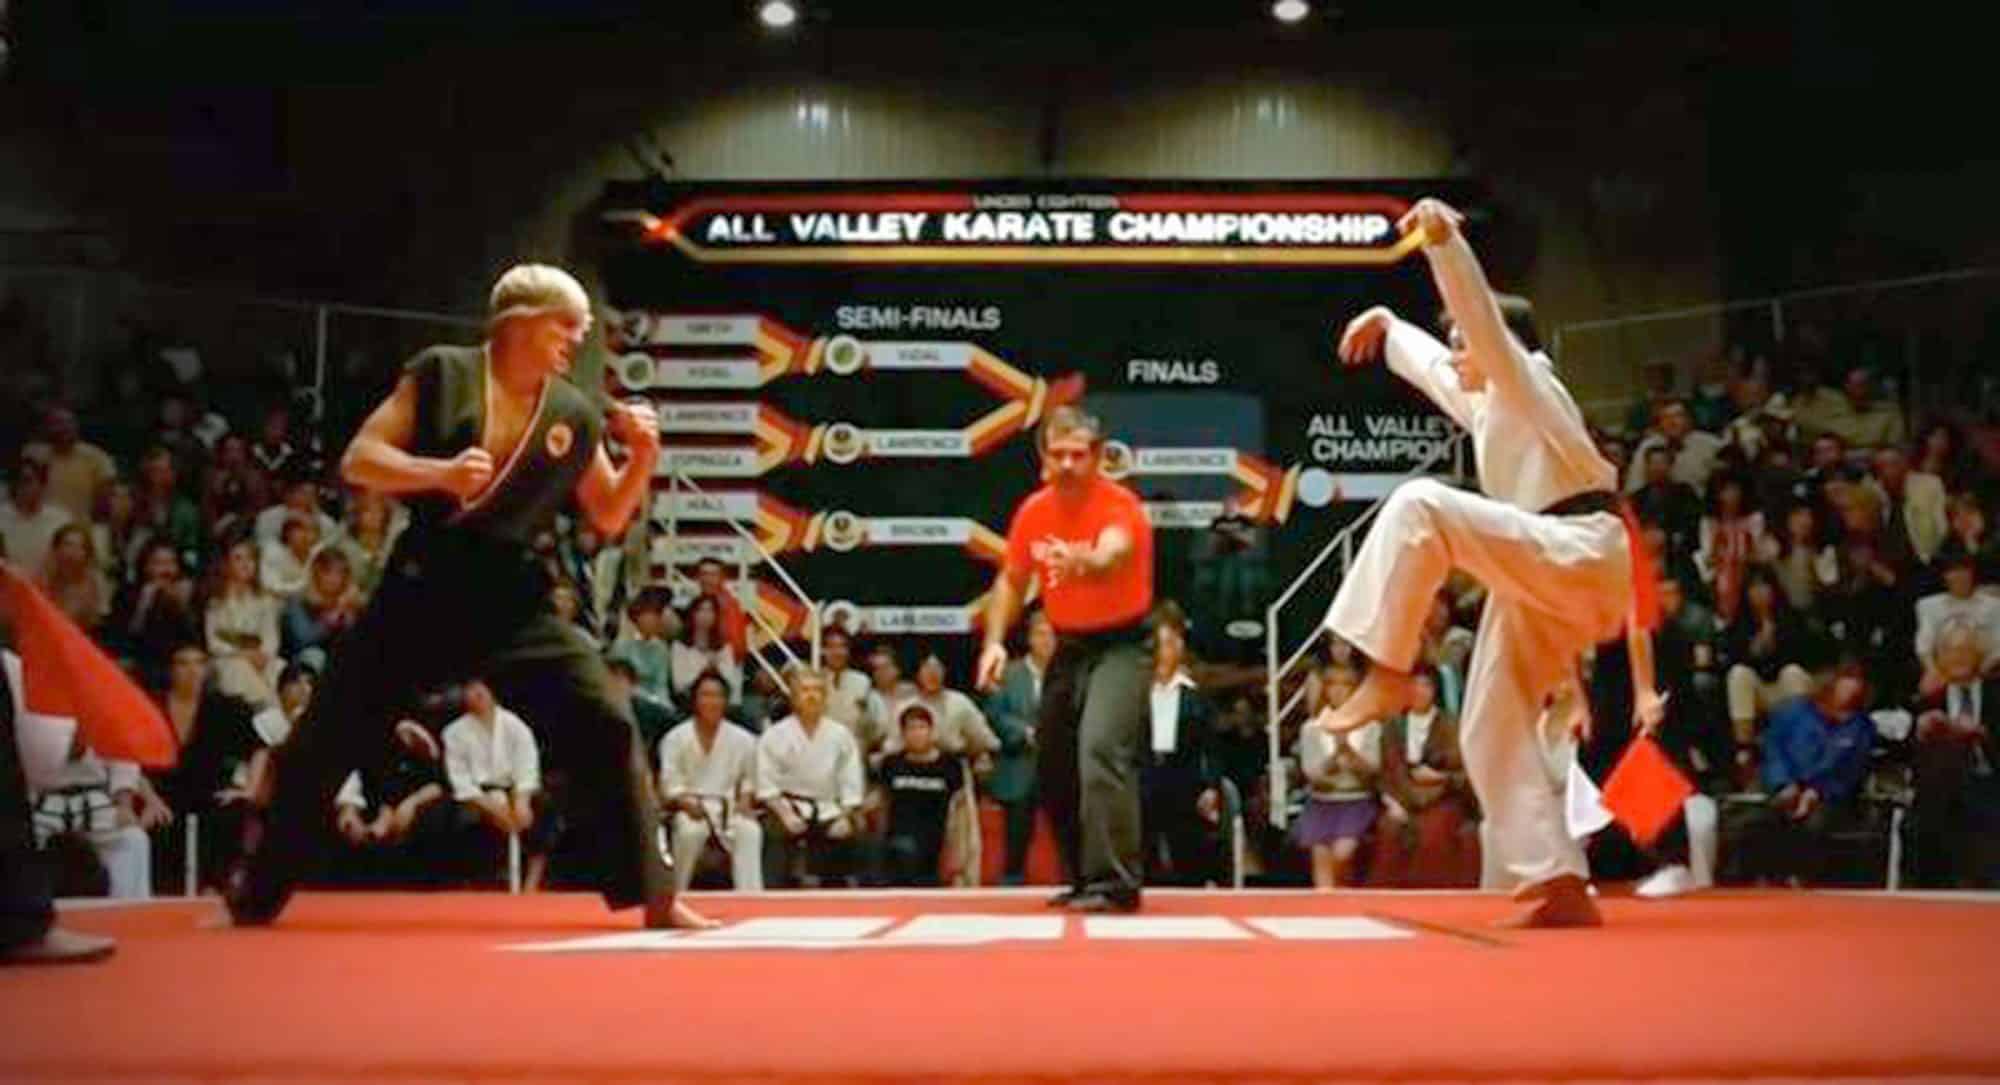 Two contestants compete in karate in this image from Columbia Pictures